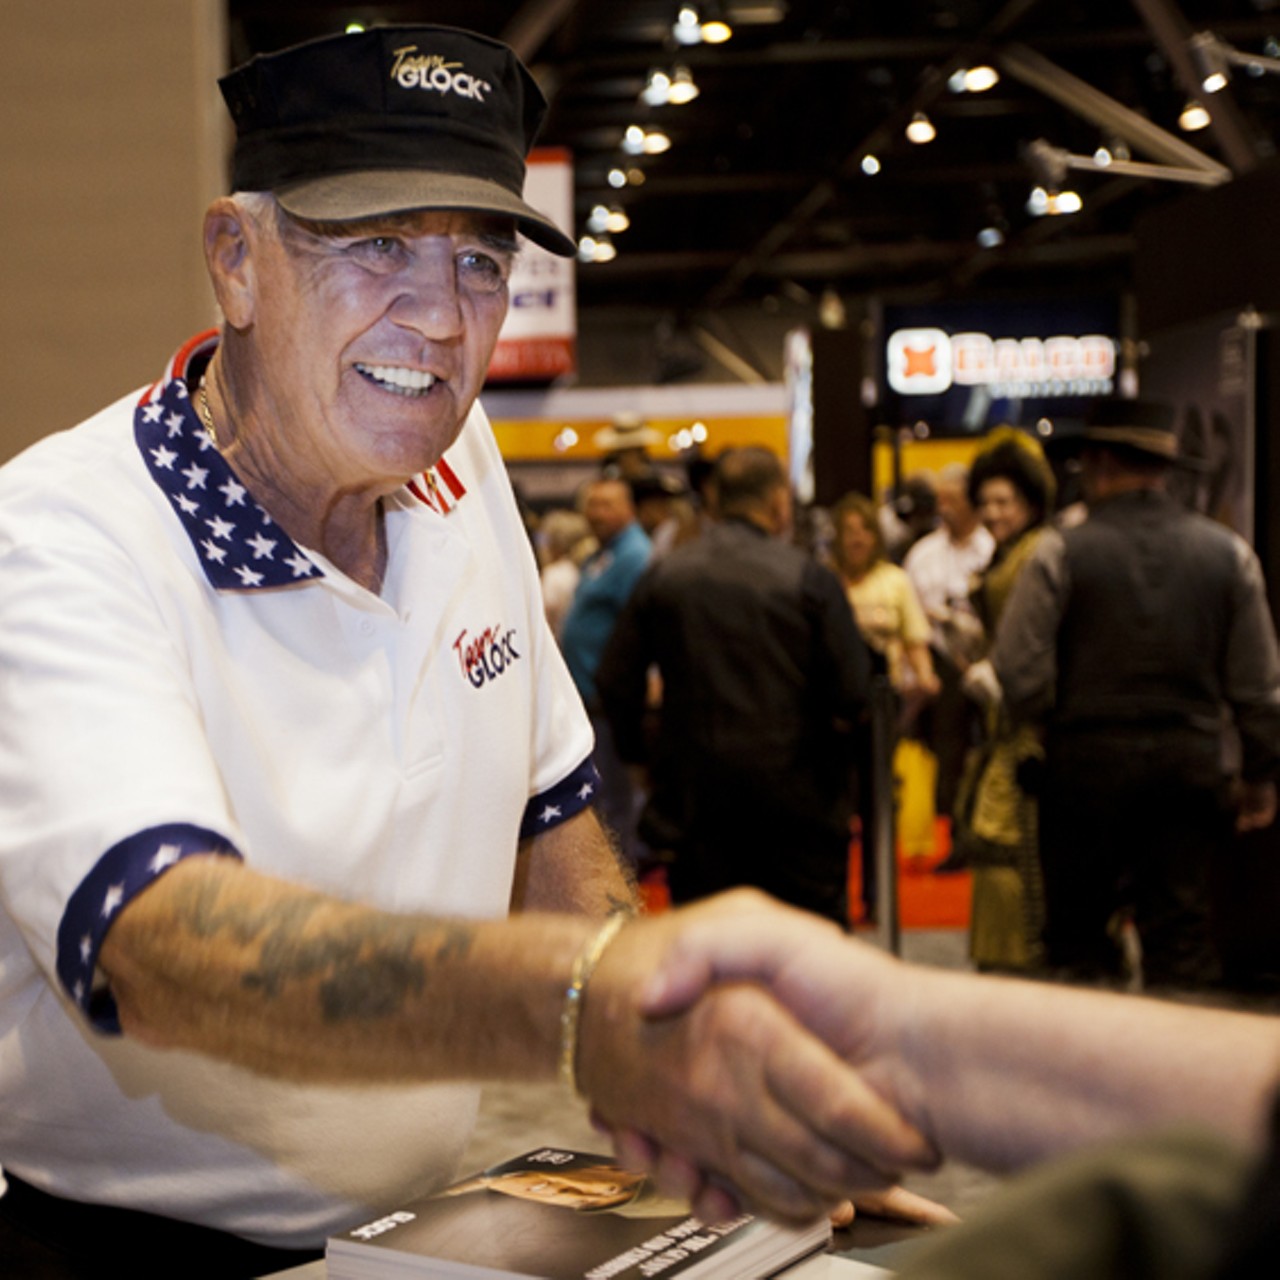 "The Gunny", R. Lee Ermey, of Full Metal Jacket fame, greets fans and signs autographs.